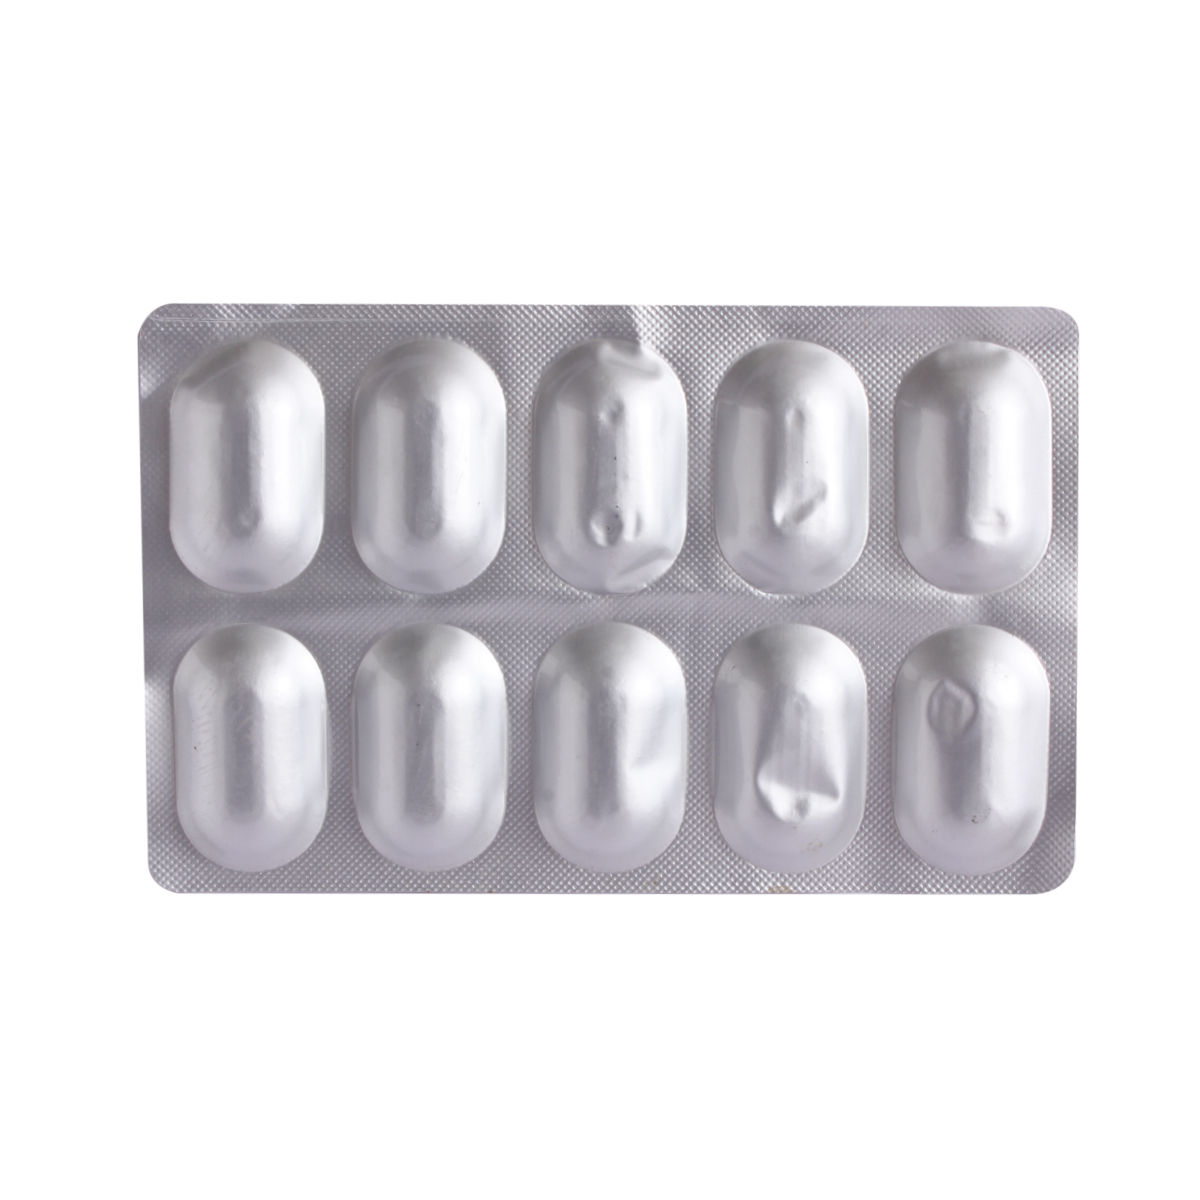 B-Gesic-SP Tablet 10's, Pack of 10 TABLETS